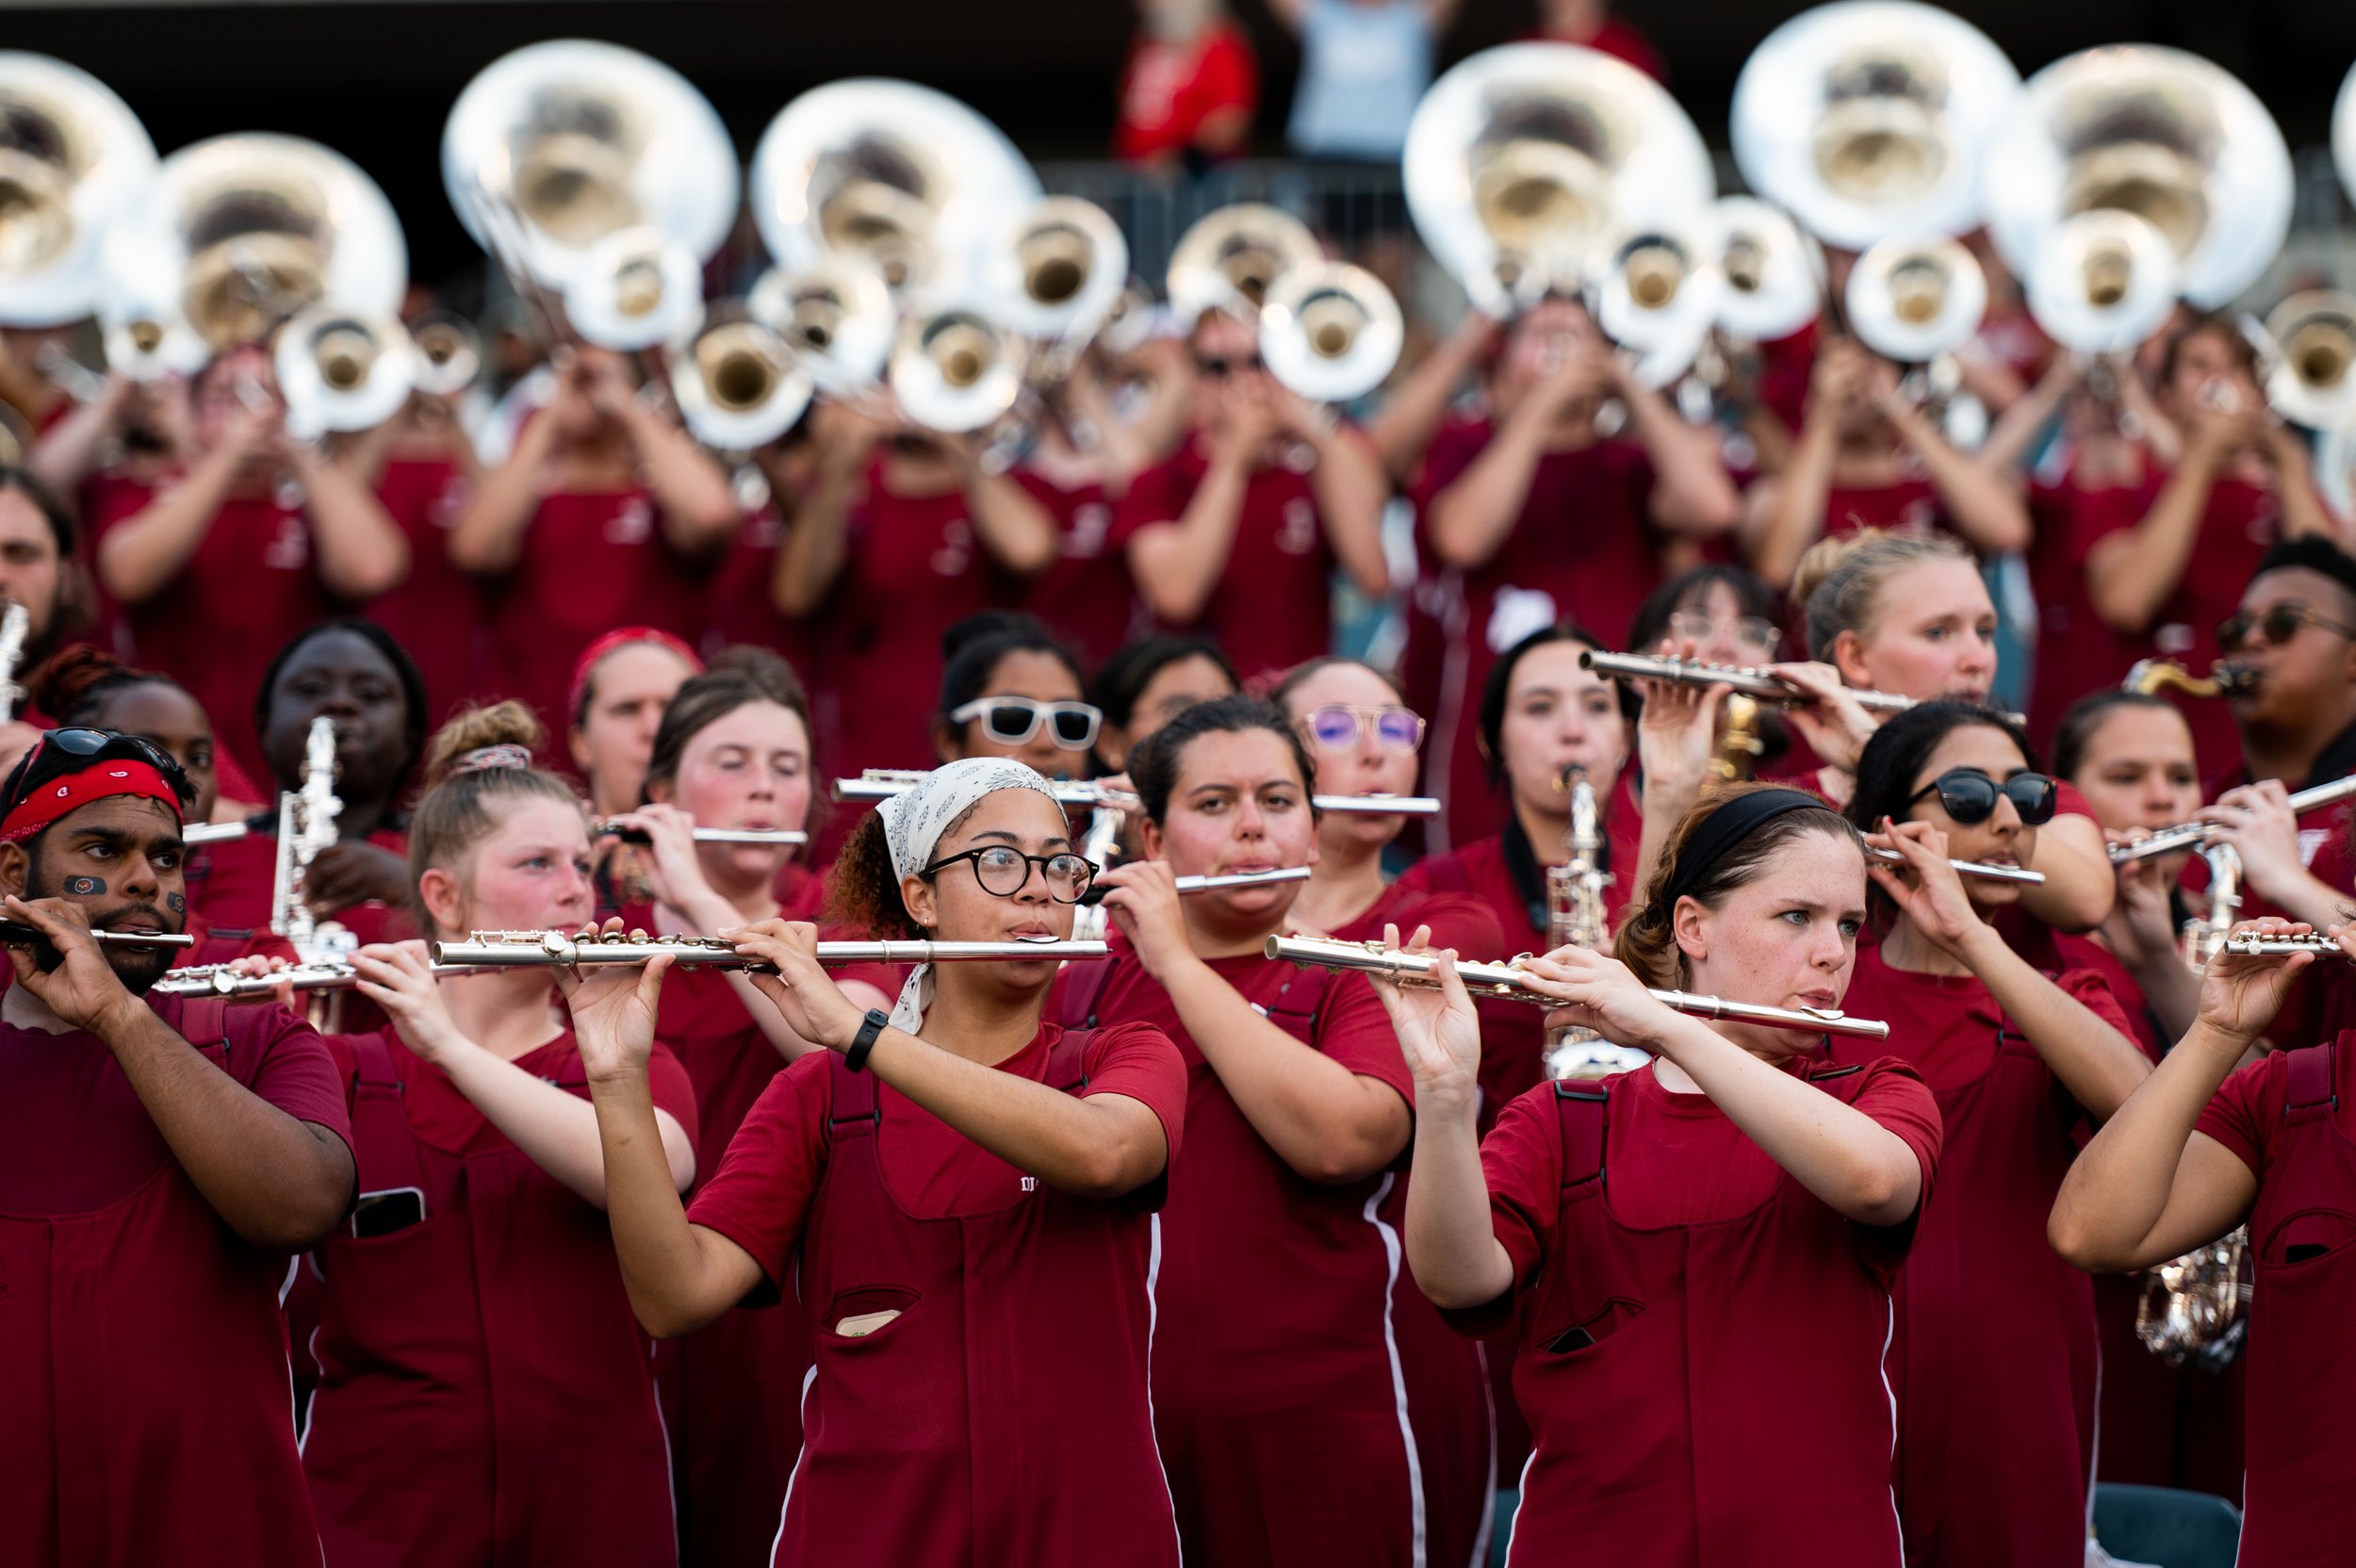   The Temple University marching band plays in the stands during the game against Lafayette College at Lincoln Financial Field on Saturday, Sept. 10, 2022.   